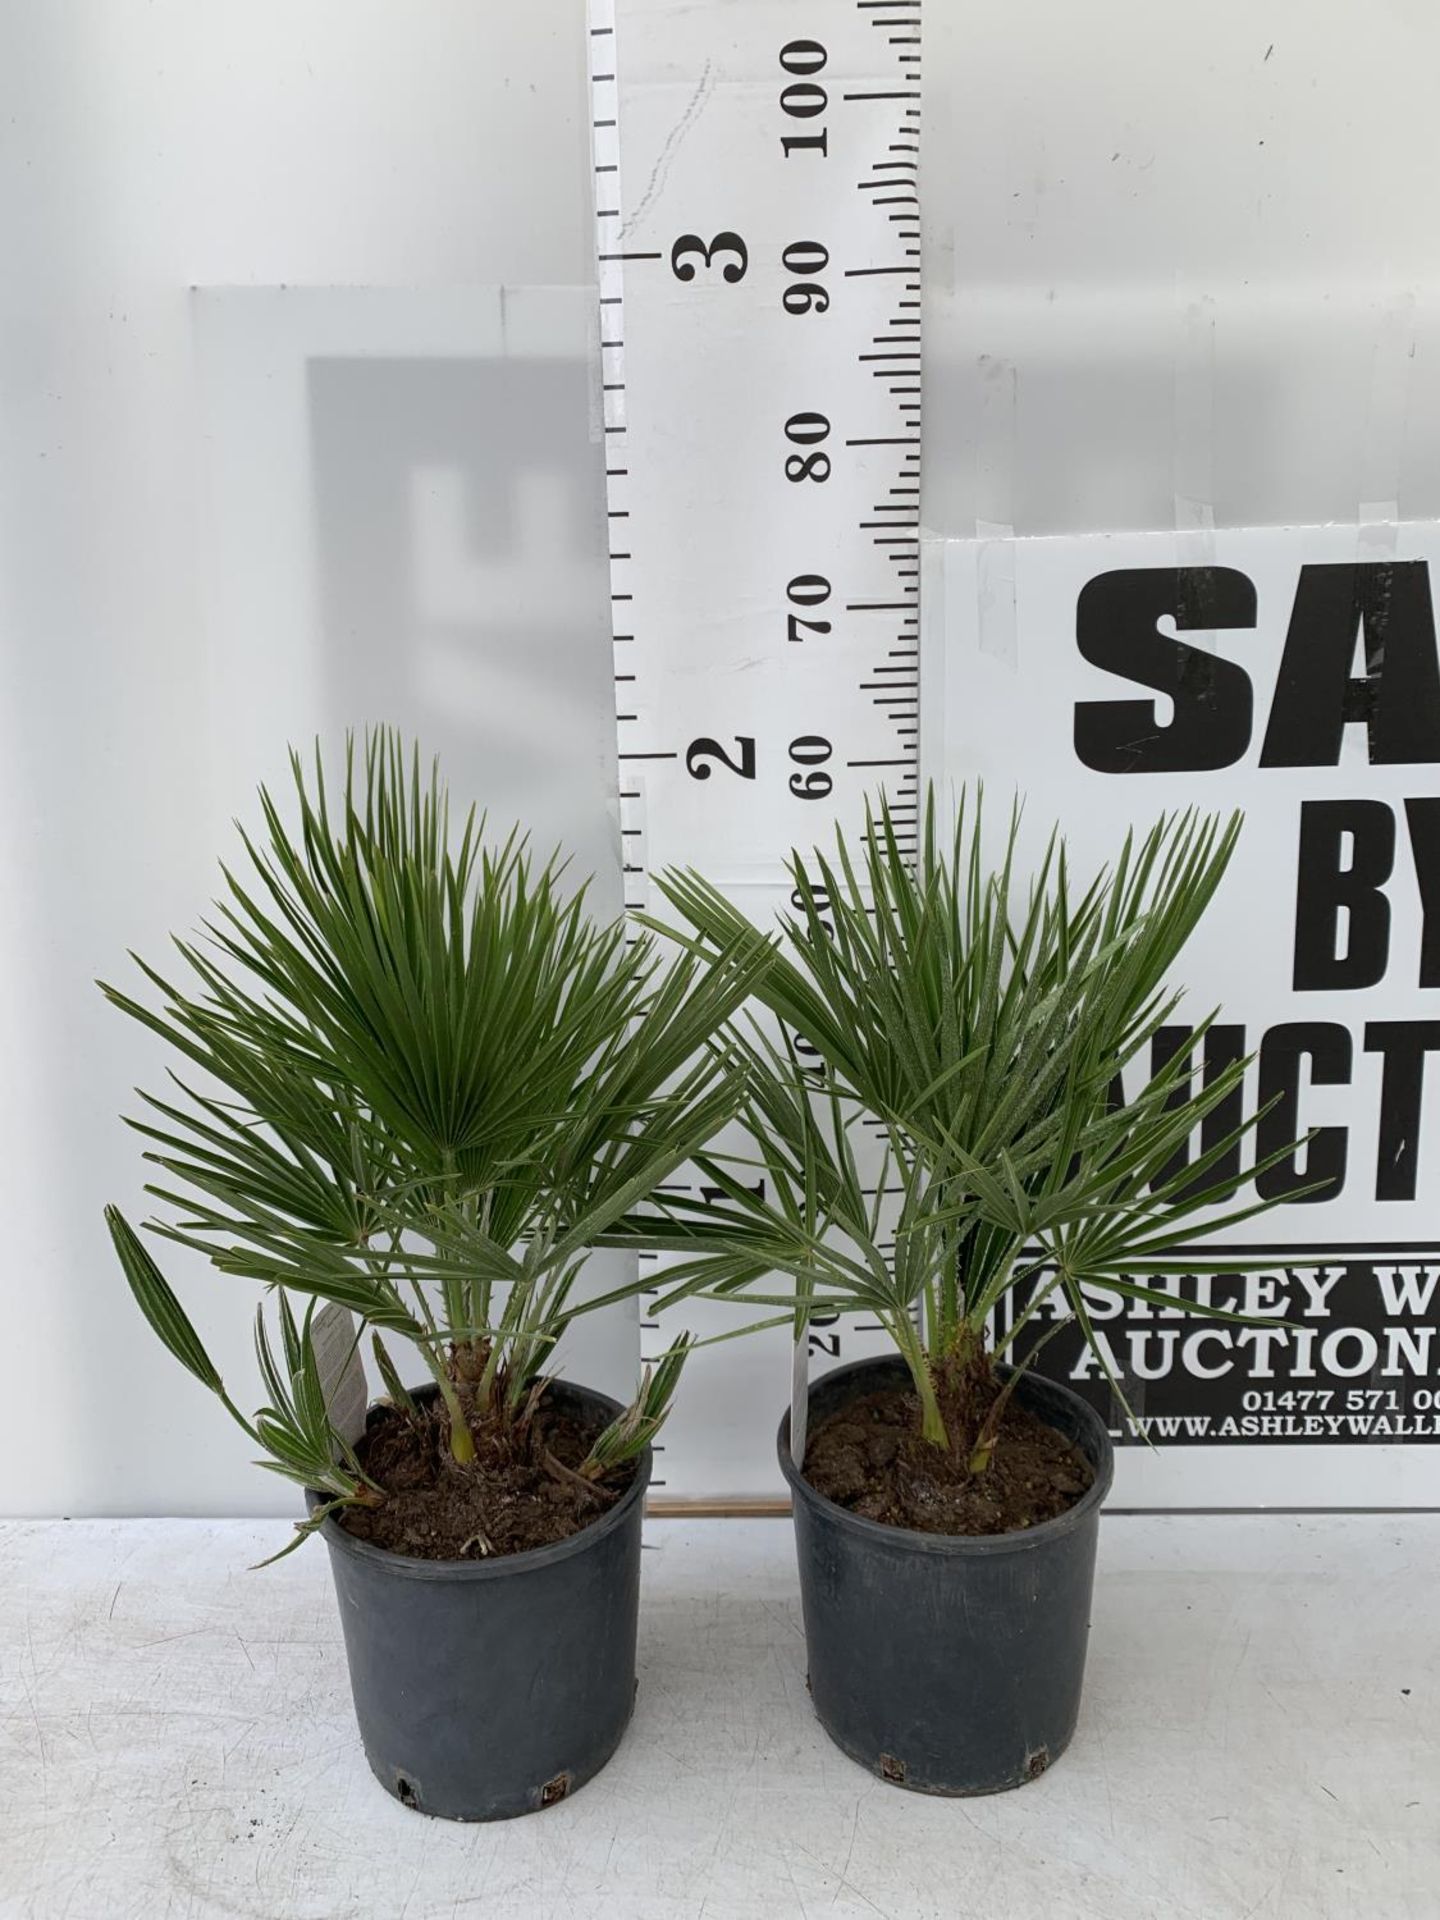 TWO CHAMAEROPS HUMILIS HARDY IN 3 LTR POTS APPROX 60CM IN HEIGHT PLUS VAT TO BE SOLD FOR THE TWO